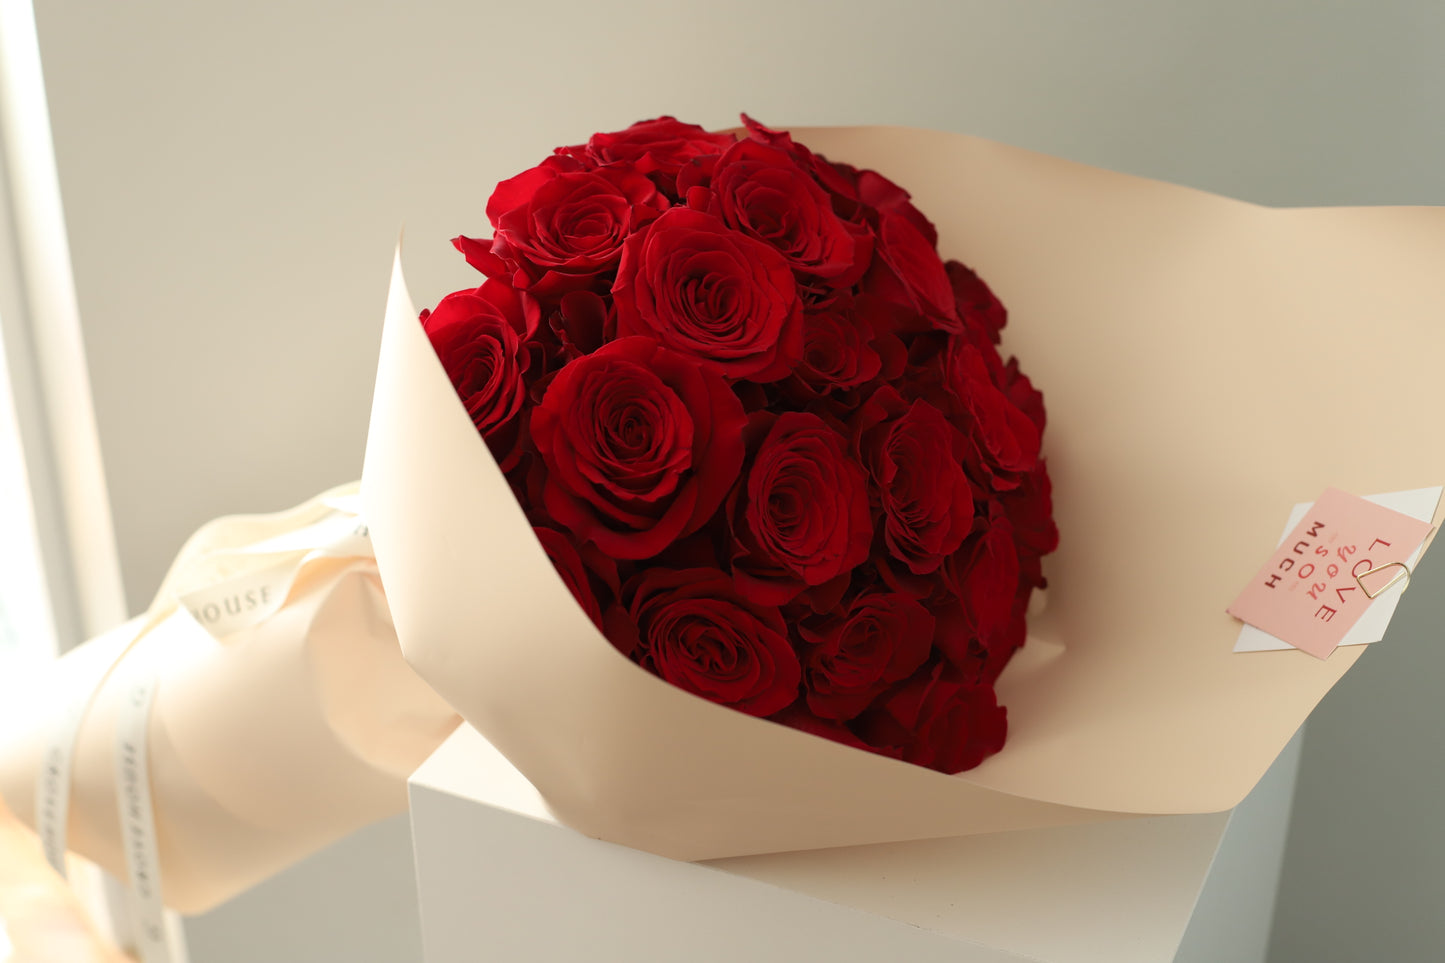 Premium Long-Stem Red Roses Wrapped Bouquet - Deluxe and Premium Options